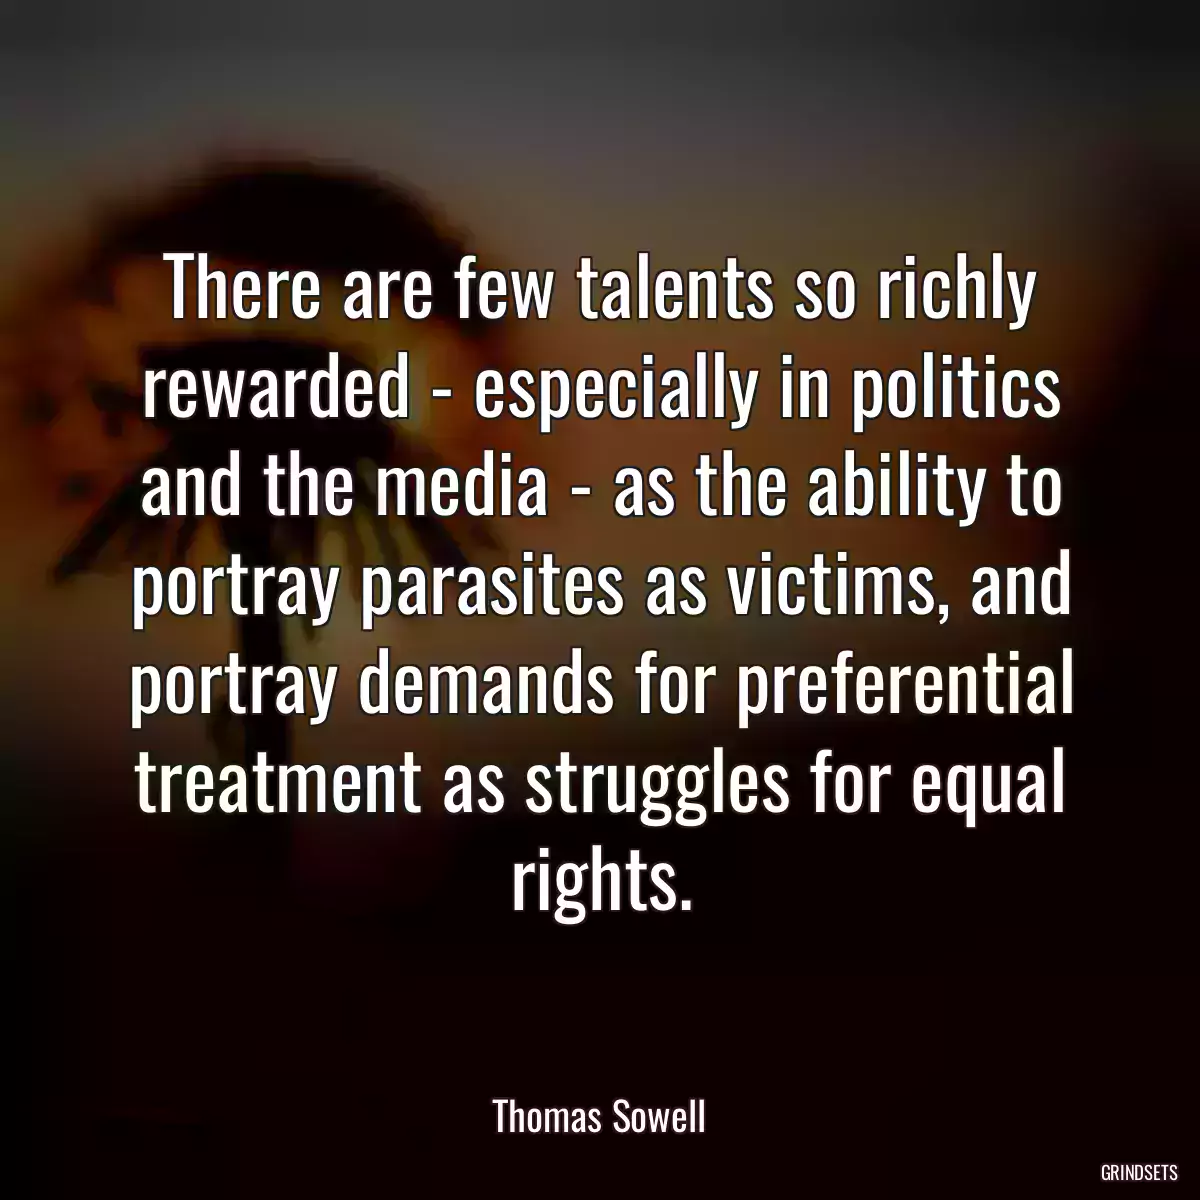 There are few talents so richly rewarded - especially in politics and the media - as the ability to portray parasites as victims, and portray demands for preferential treatment as struggles for equal rights.